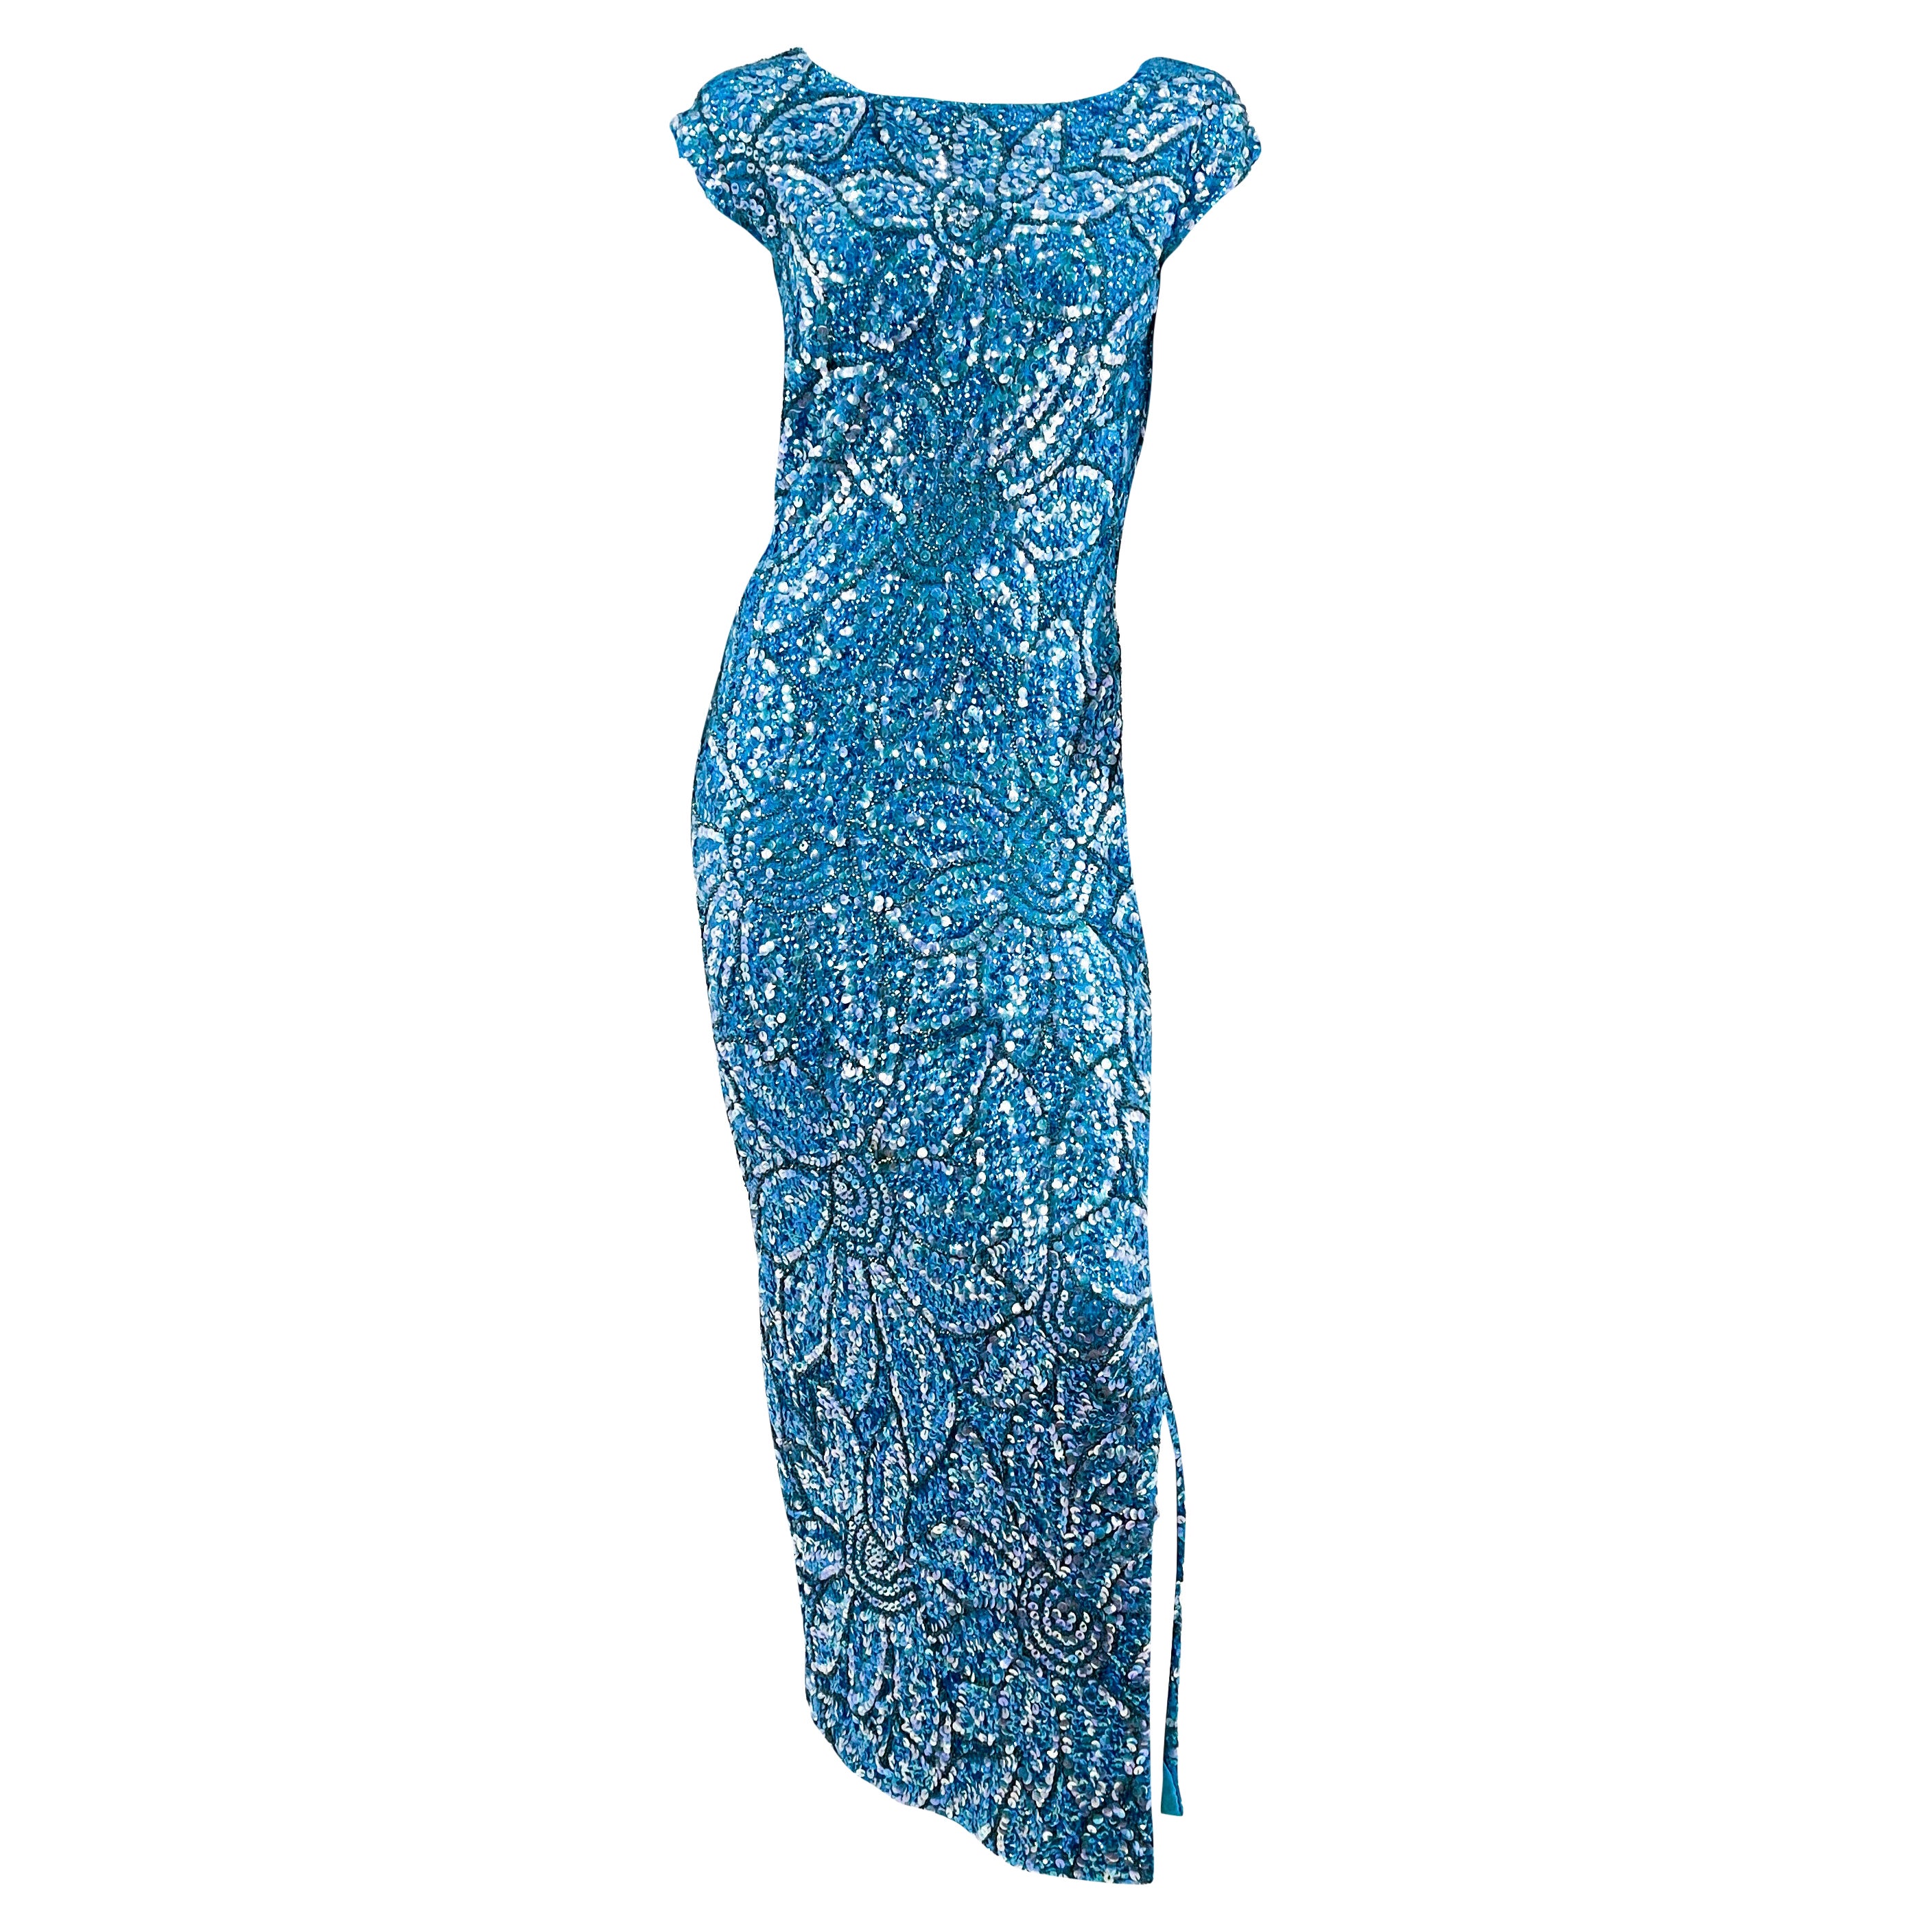 1950s Imperial Aqua Blue Sequin and Beaded Knit Dress